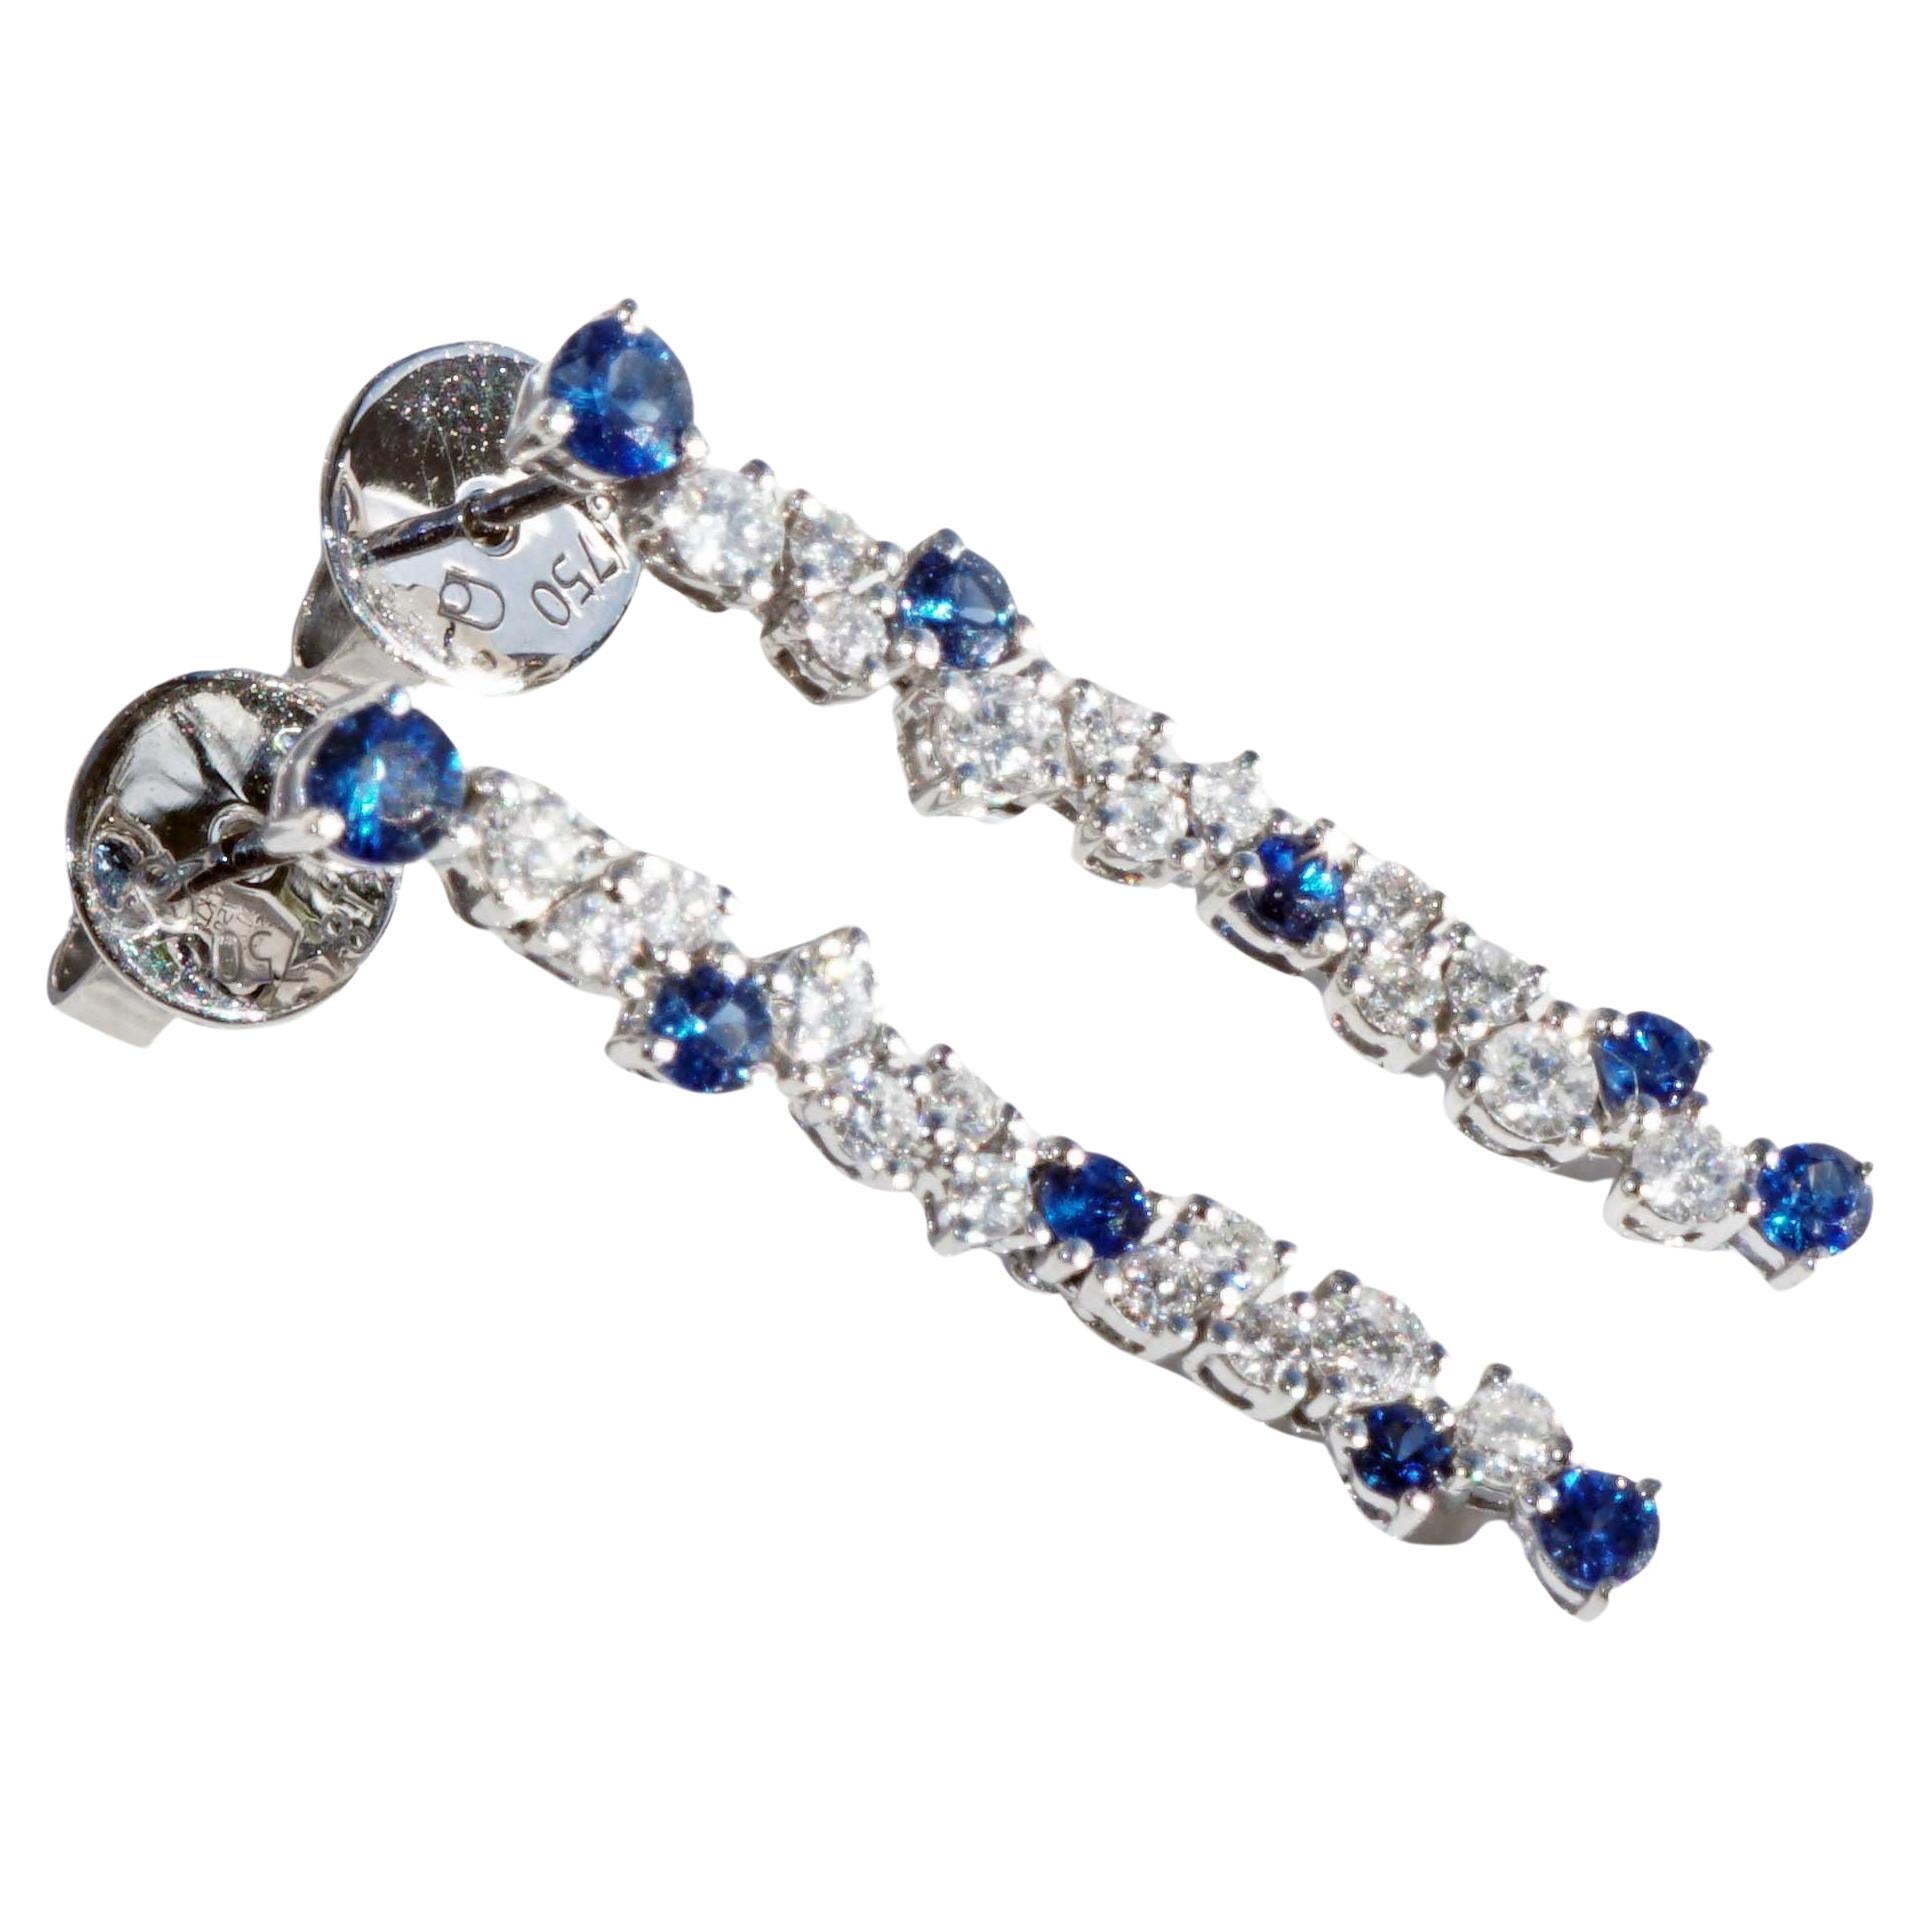 enchanting earrings for a glorious appearance in linear arrangement with staggered set saphires and brilliant-cut diamonds, 10 round-faced fine saphires total approx. 0.50 ct, 24 small and larger full-cut brilliant-cut diamonds total approx. 0.56